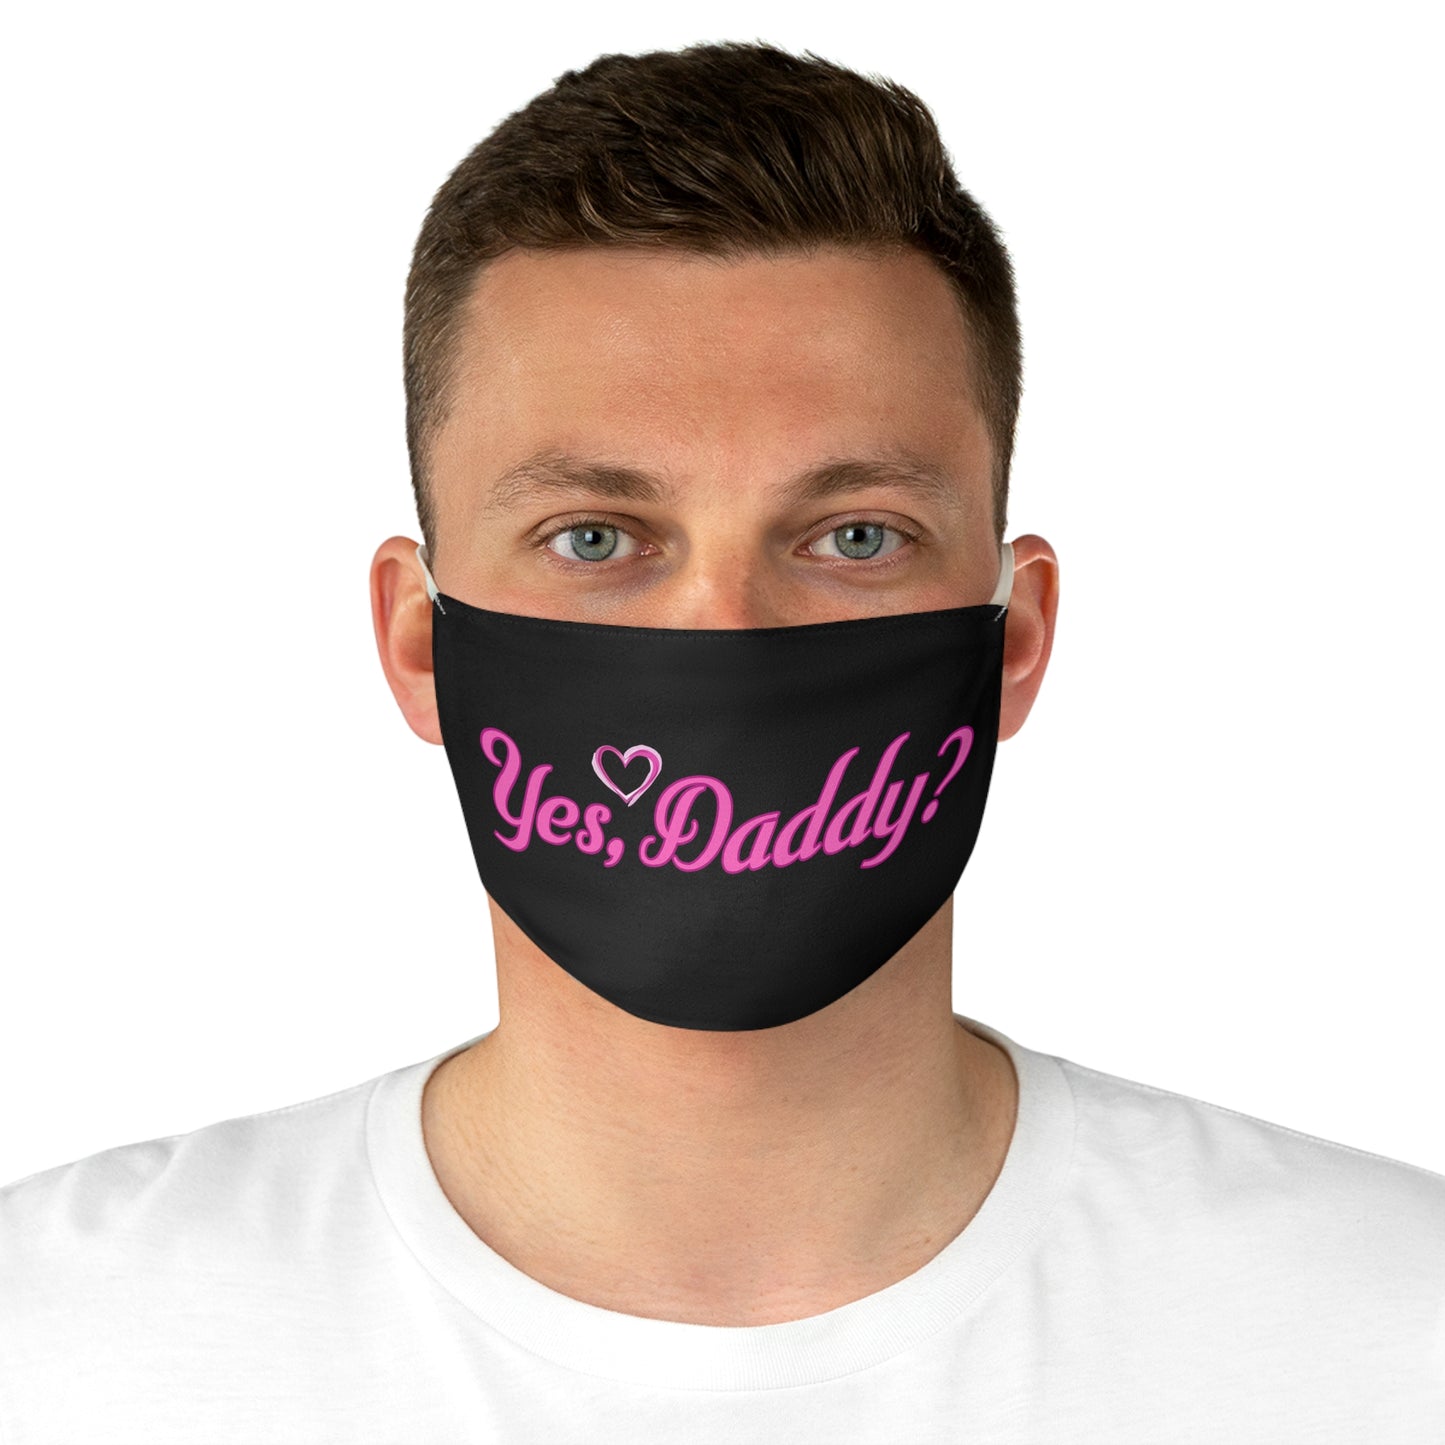 Copy of Yes, Daddy? Fabric Face Mask |